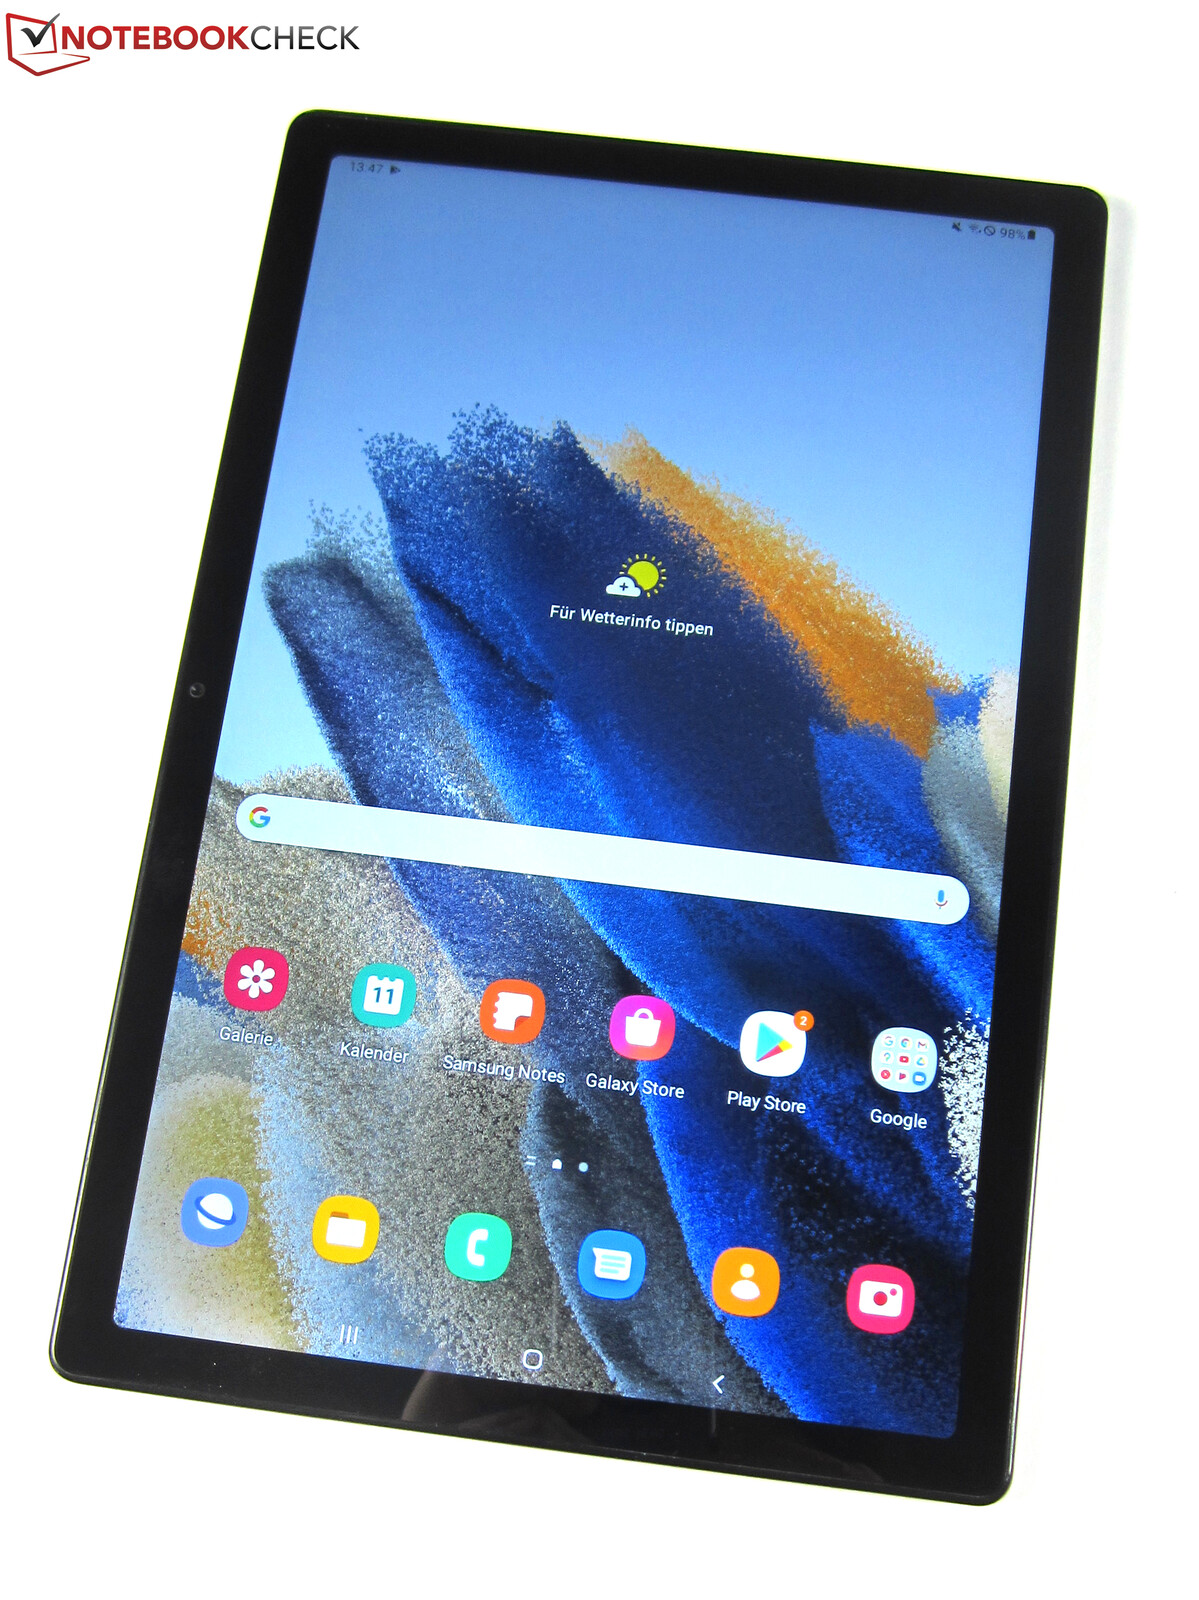 Samsung Galaxy Tab A8 - The of NotebookCheck.net - mid-range News edition affordable the new tablet